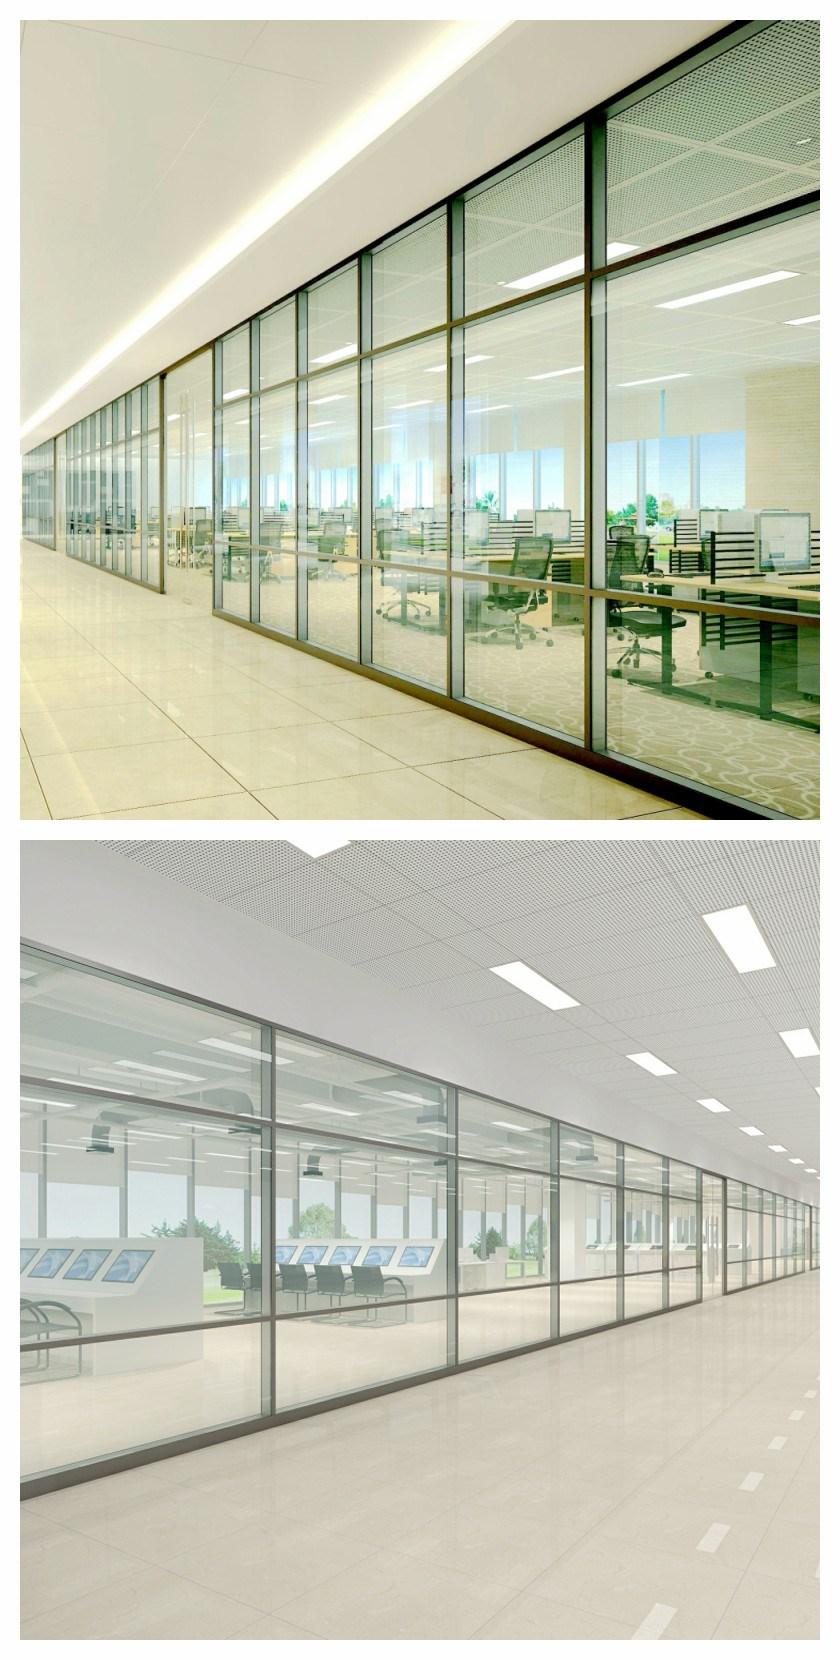 Office Interior Design Furniture Room Divider Fire Proof Room Divider Glass Wall Partition